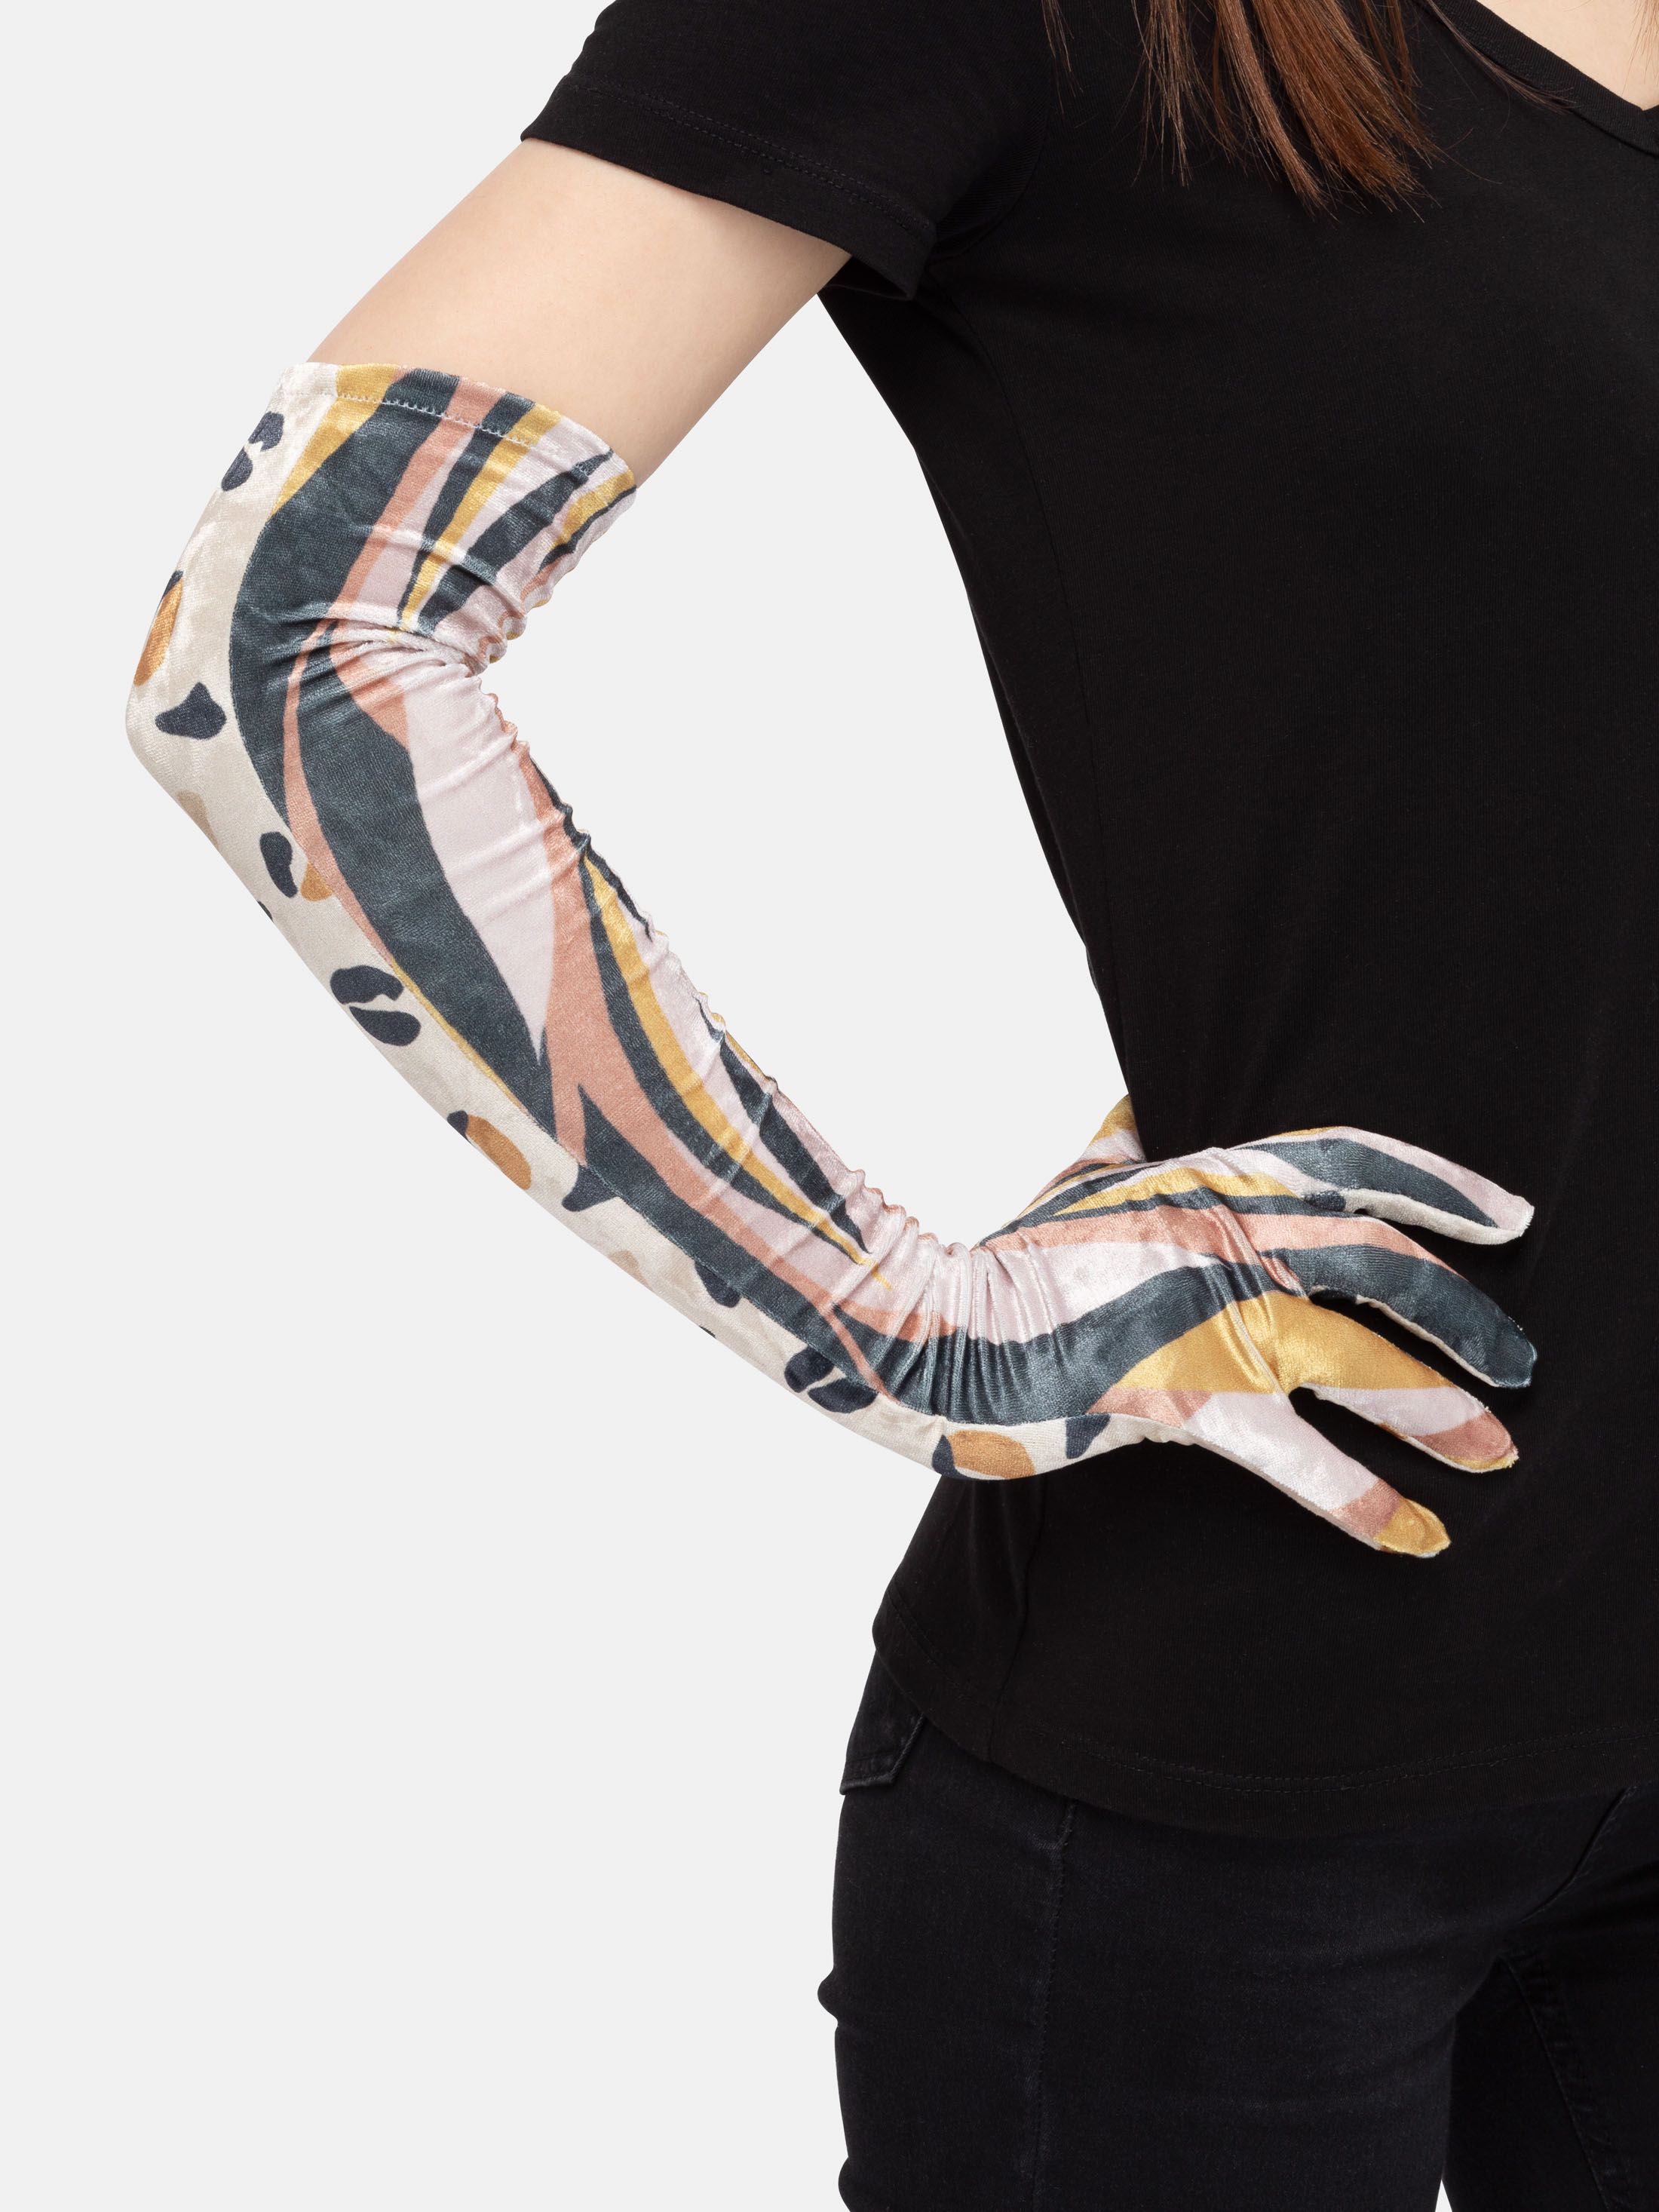 design your own opera gloves